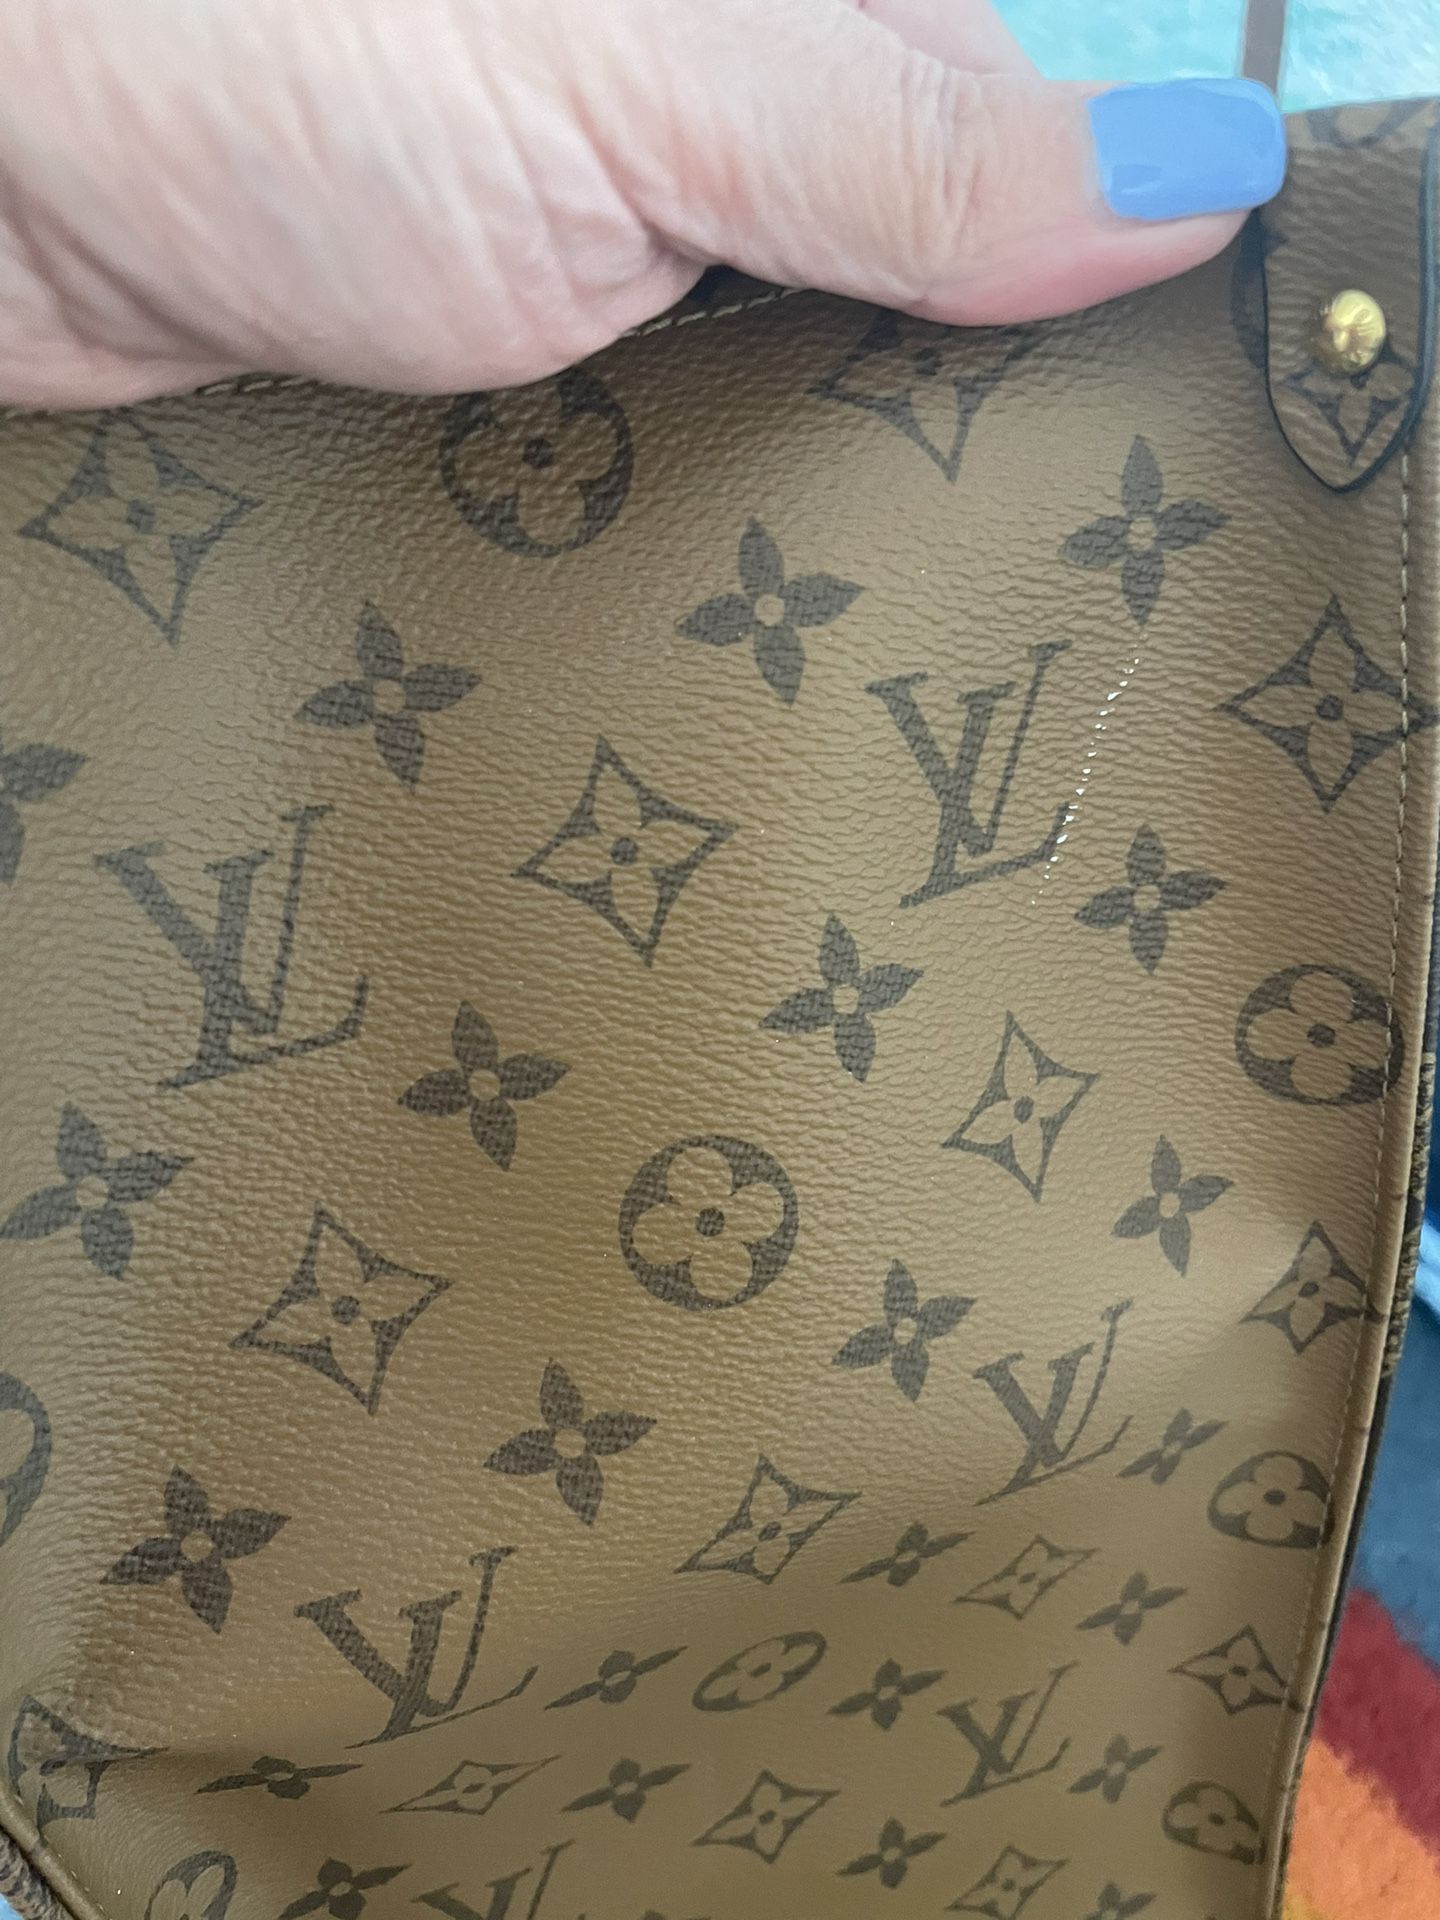 Authentic LV Bag Authenticated By TRR But Rejected For Excessive Wear for  Sale in Mountain View, CA - OfferUp